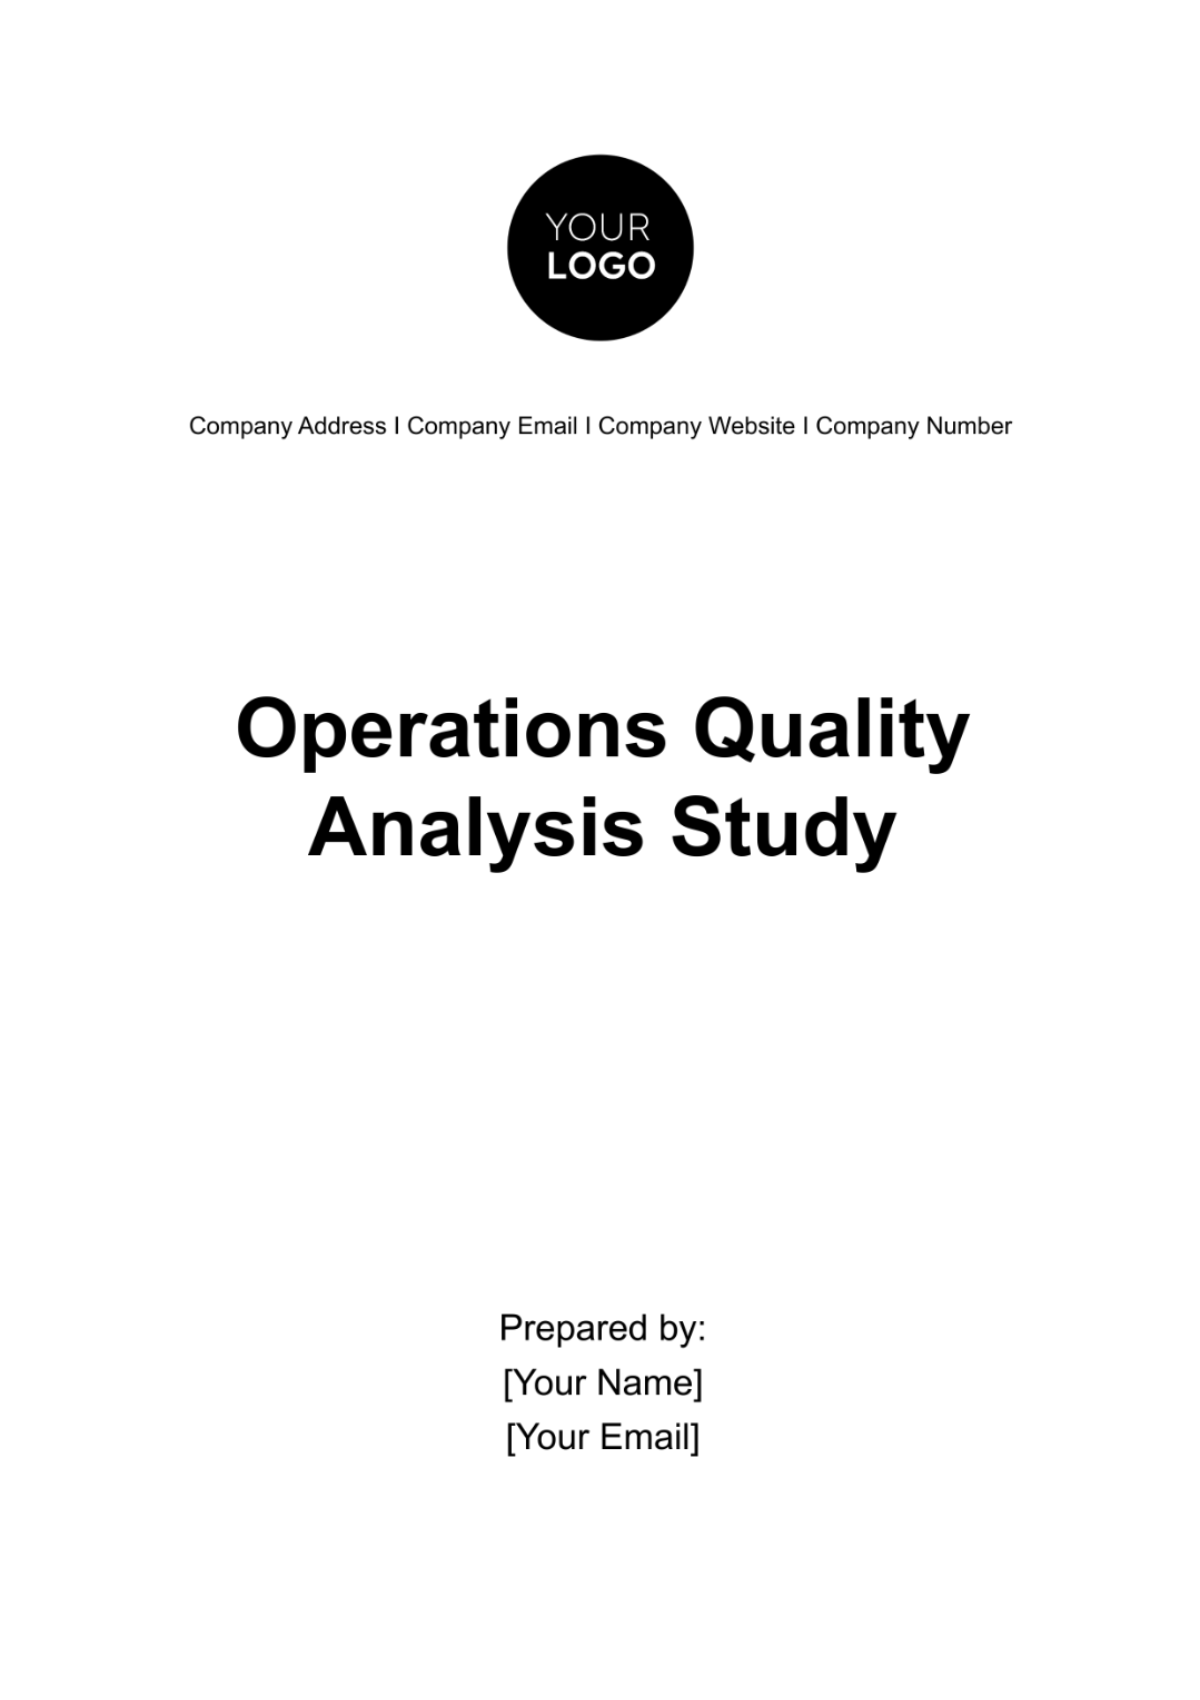 Operations Quality Analysis Study Template